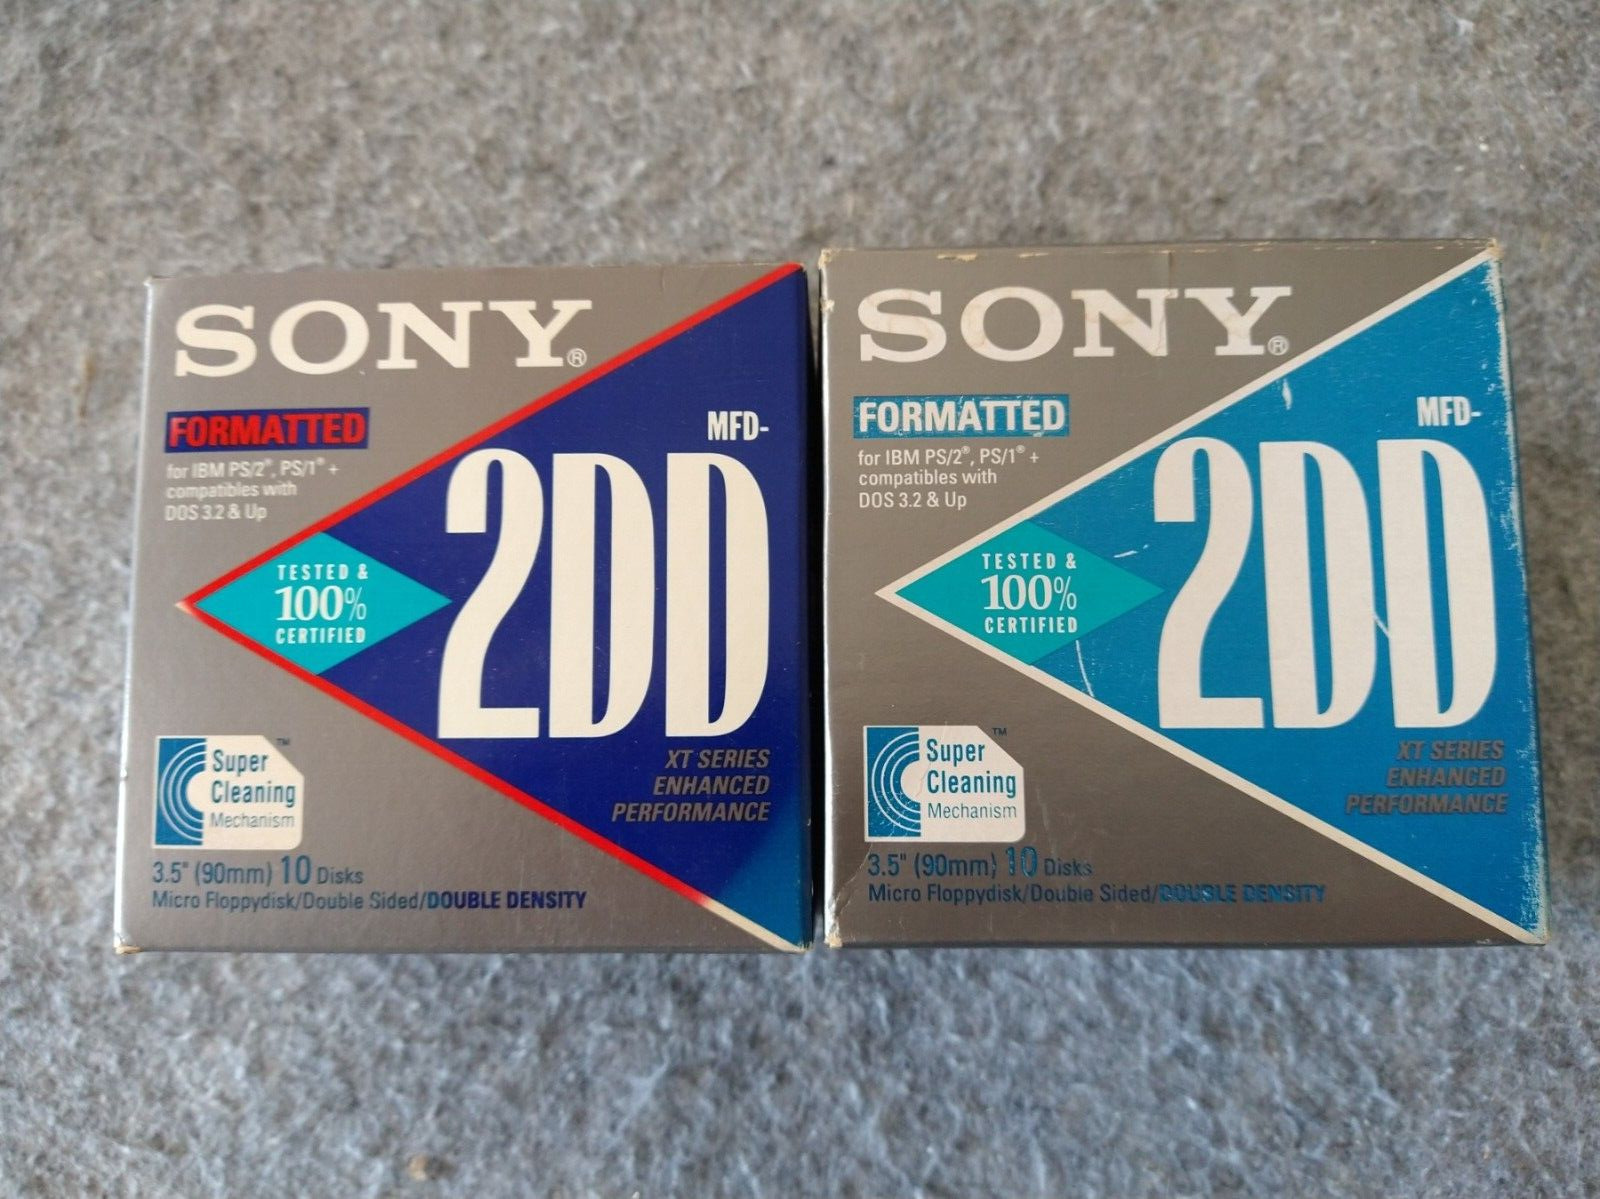 Sony 2HD 2DD Floppy Diskettes IBM Formatted 2X10 Pack 20 Total Un-used Open Box